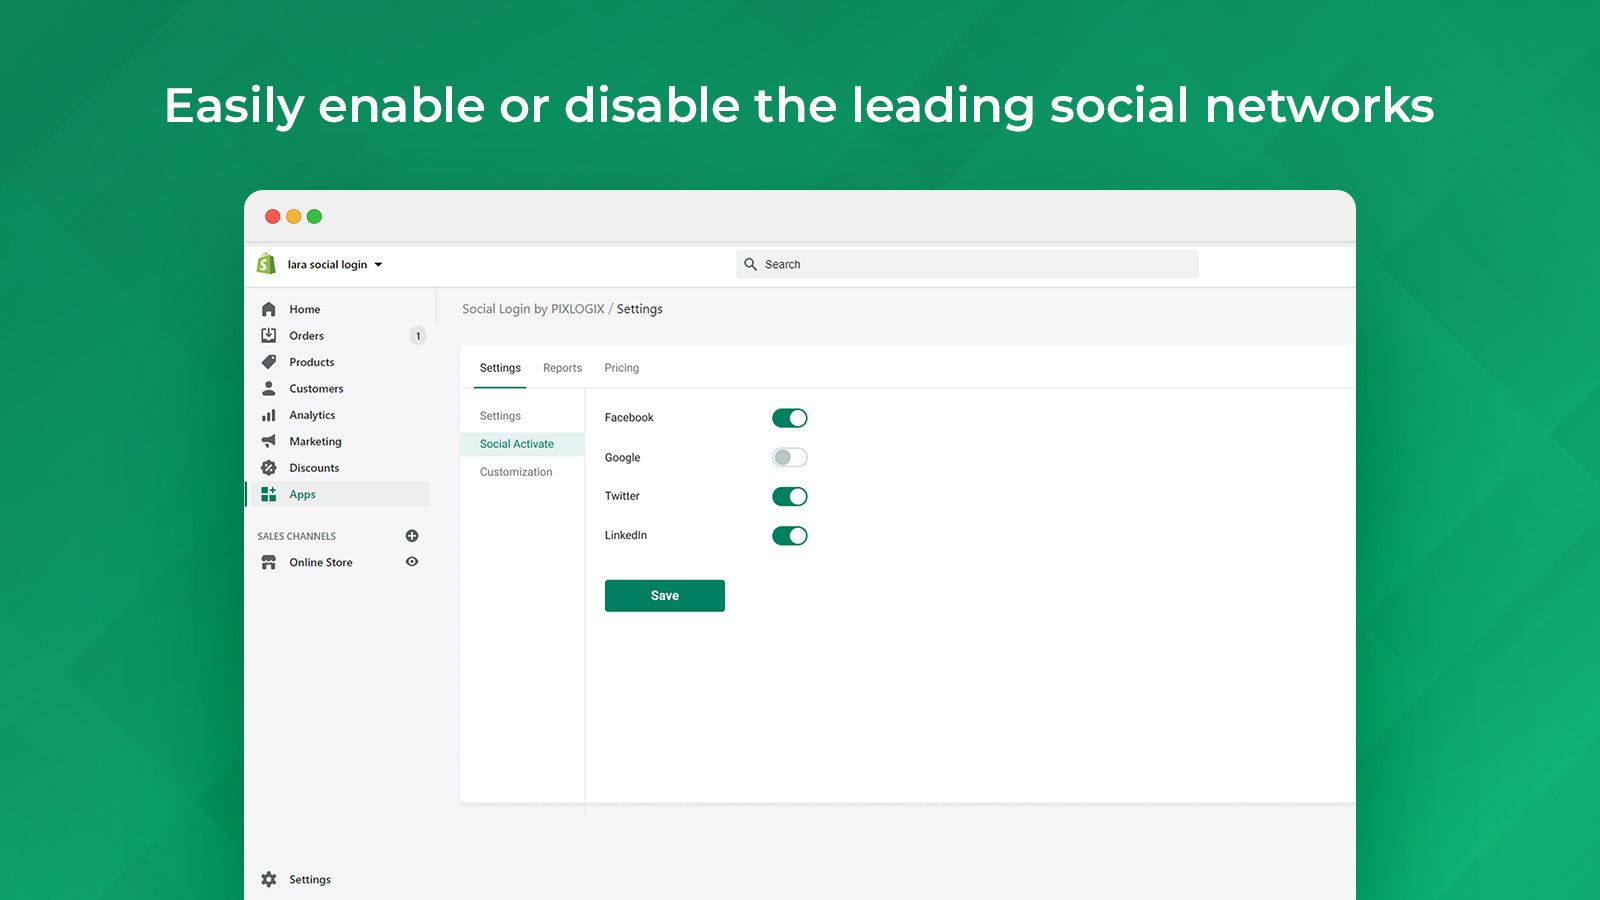 Easy enable and disable social platform